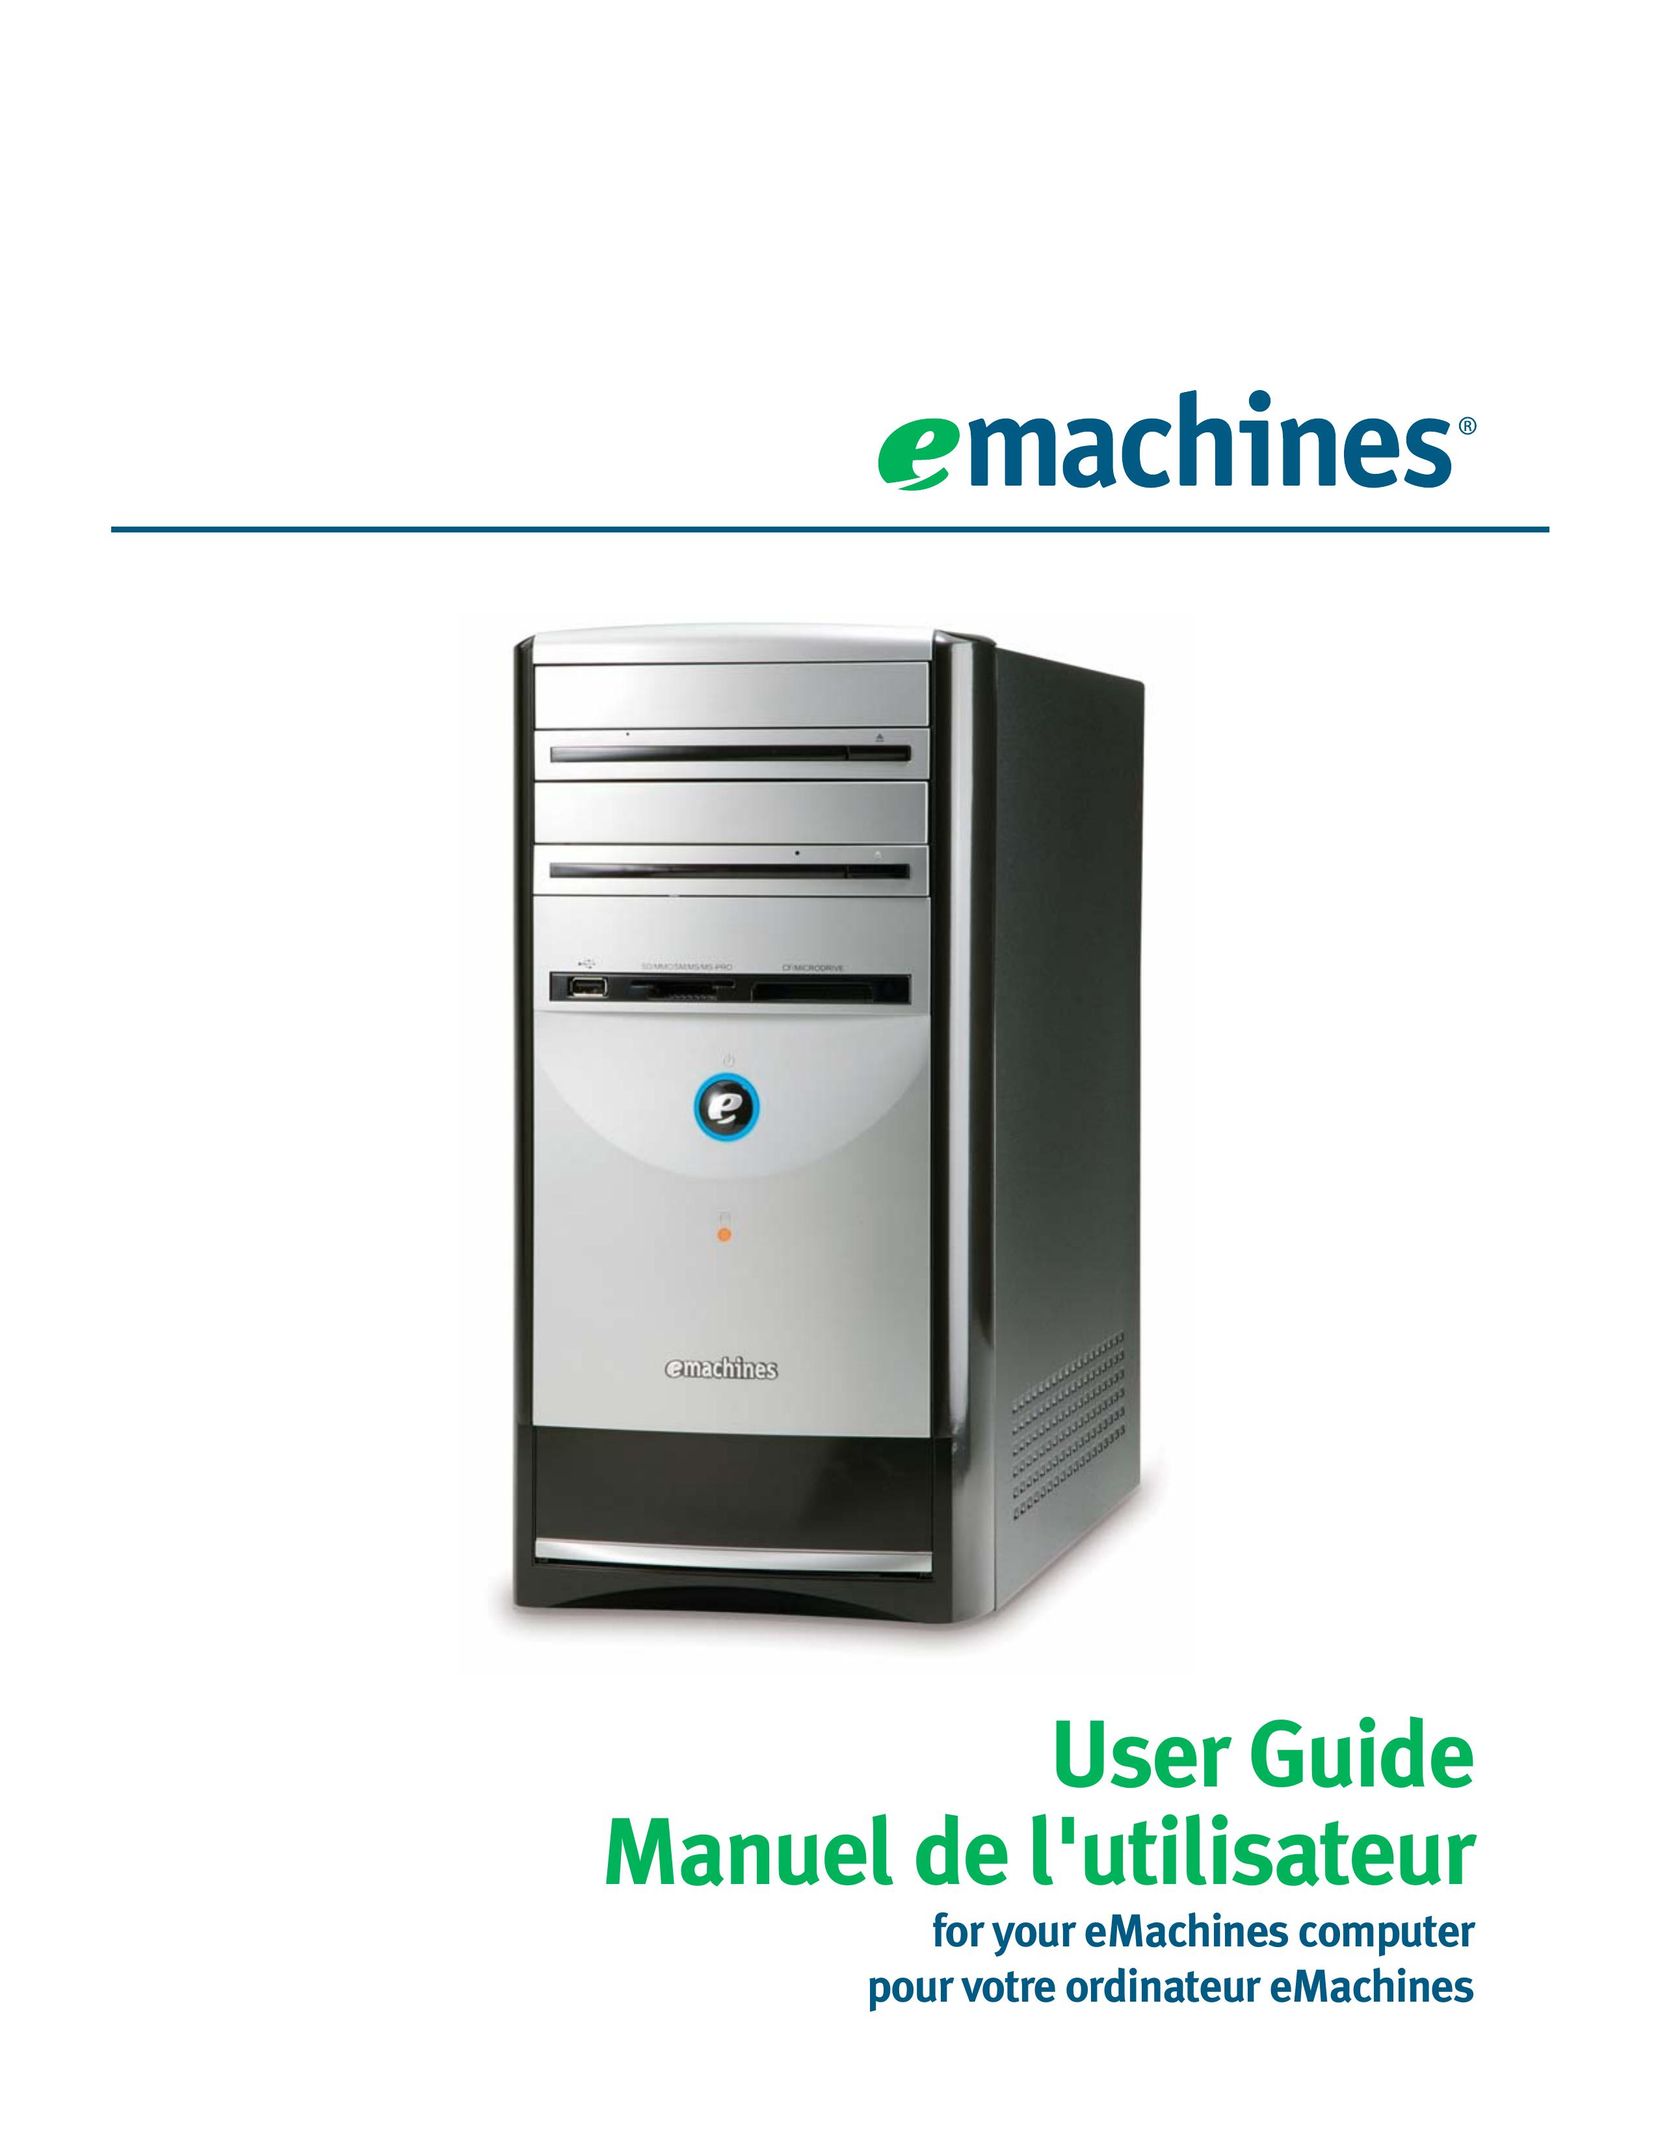 eMachines H3120 Personal Computer User Manual